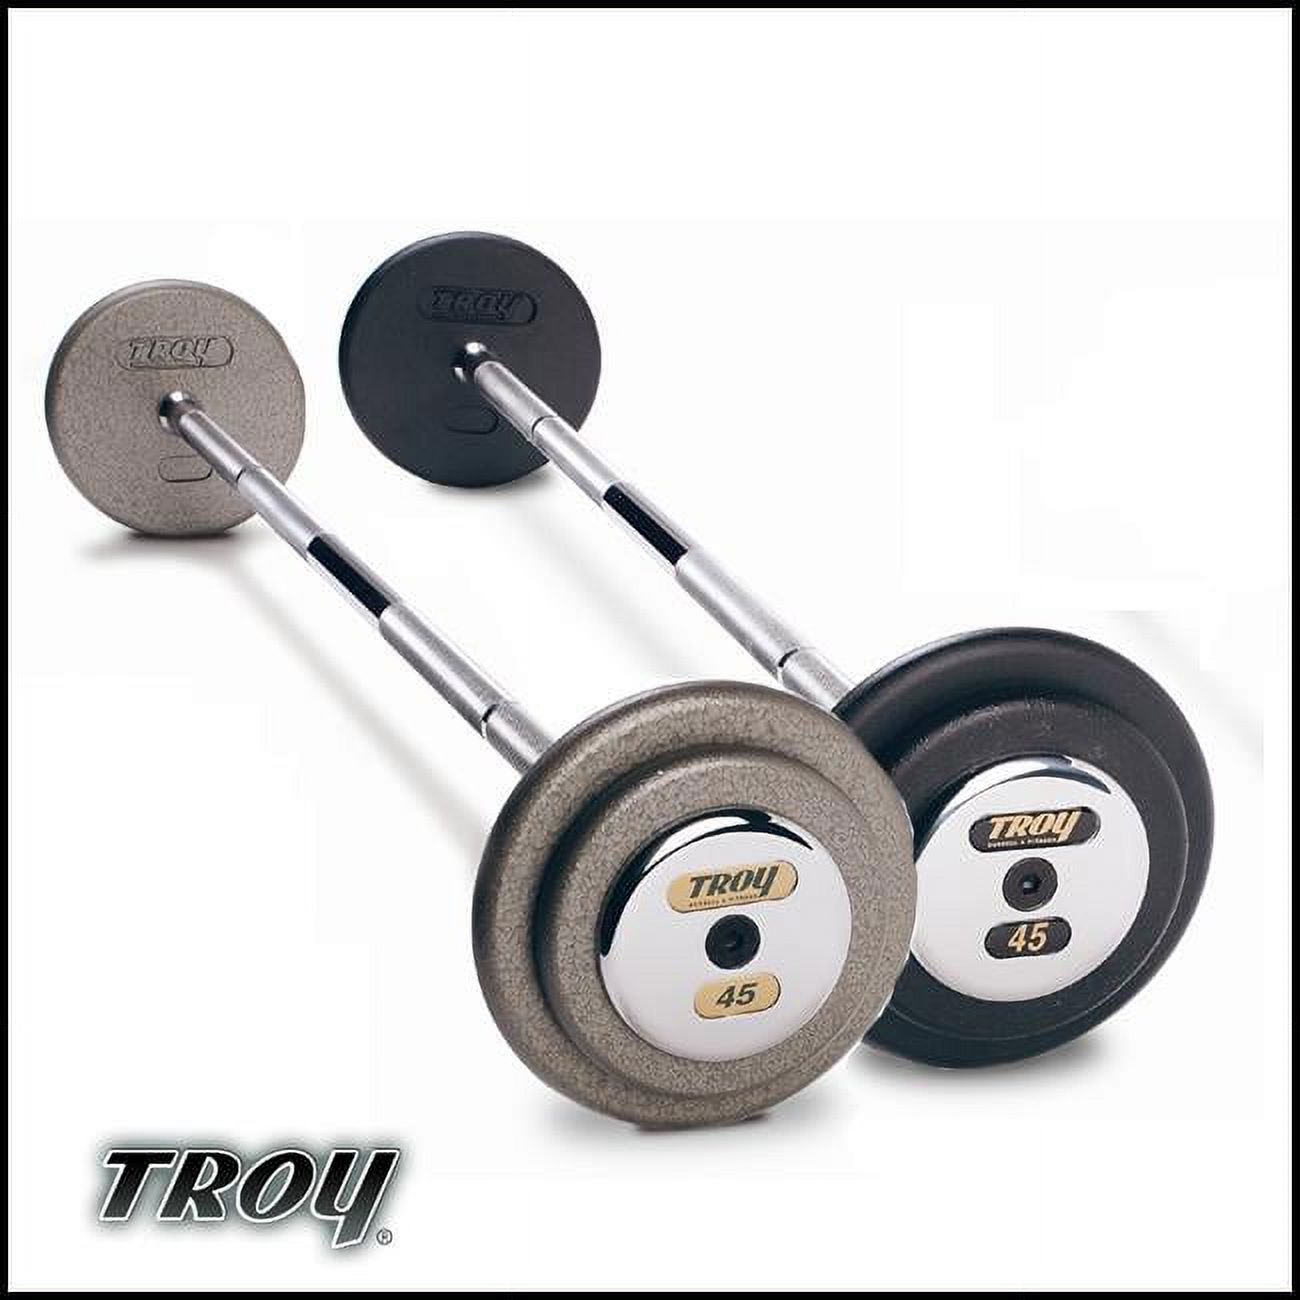 Troy Barbell PFB-020C Pro-Style Fix Curl Barbell - Black Plates And Chrome End Caps - 20 Pounds - image 1 of 1